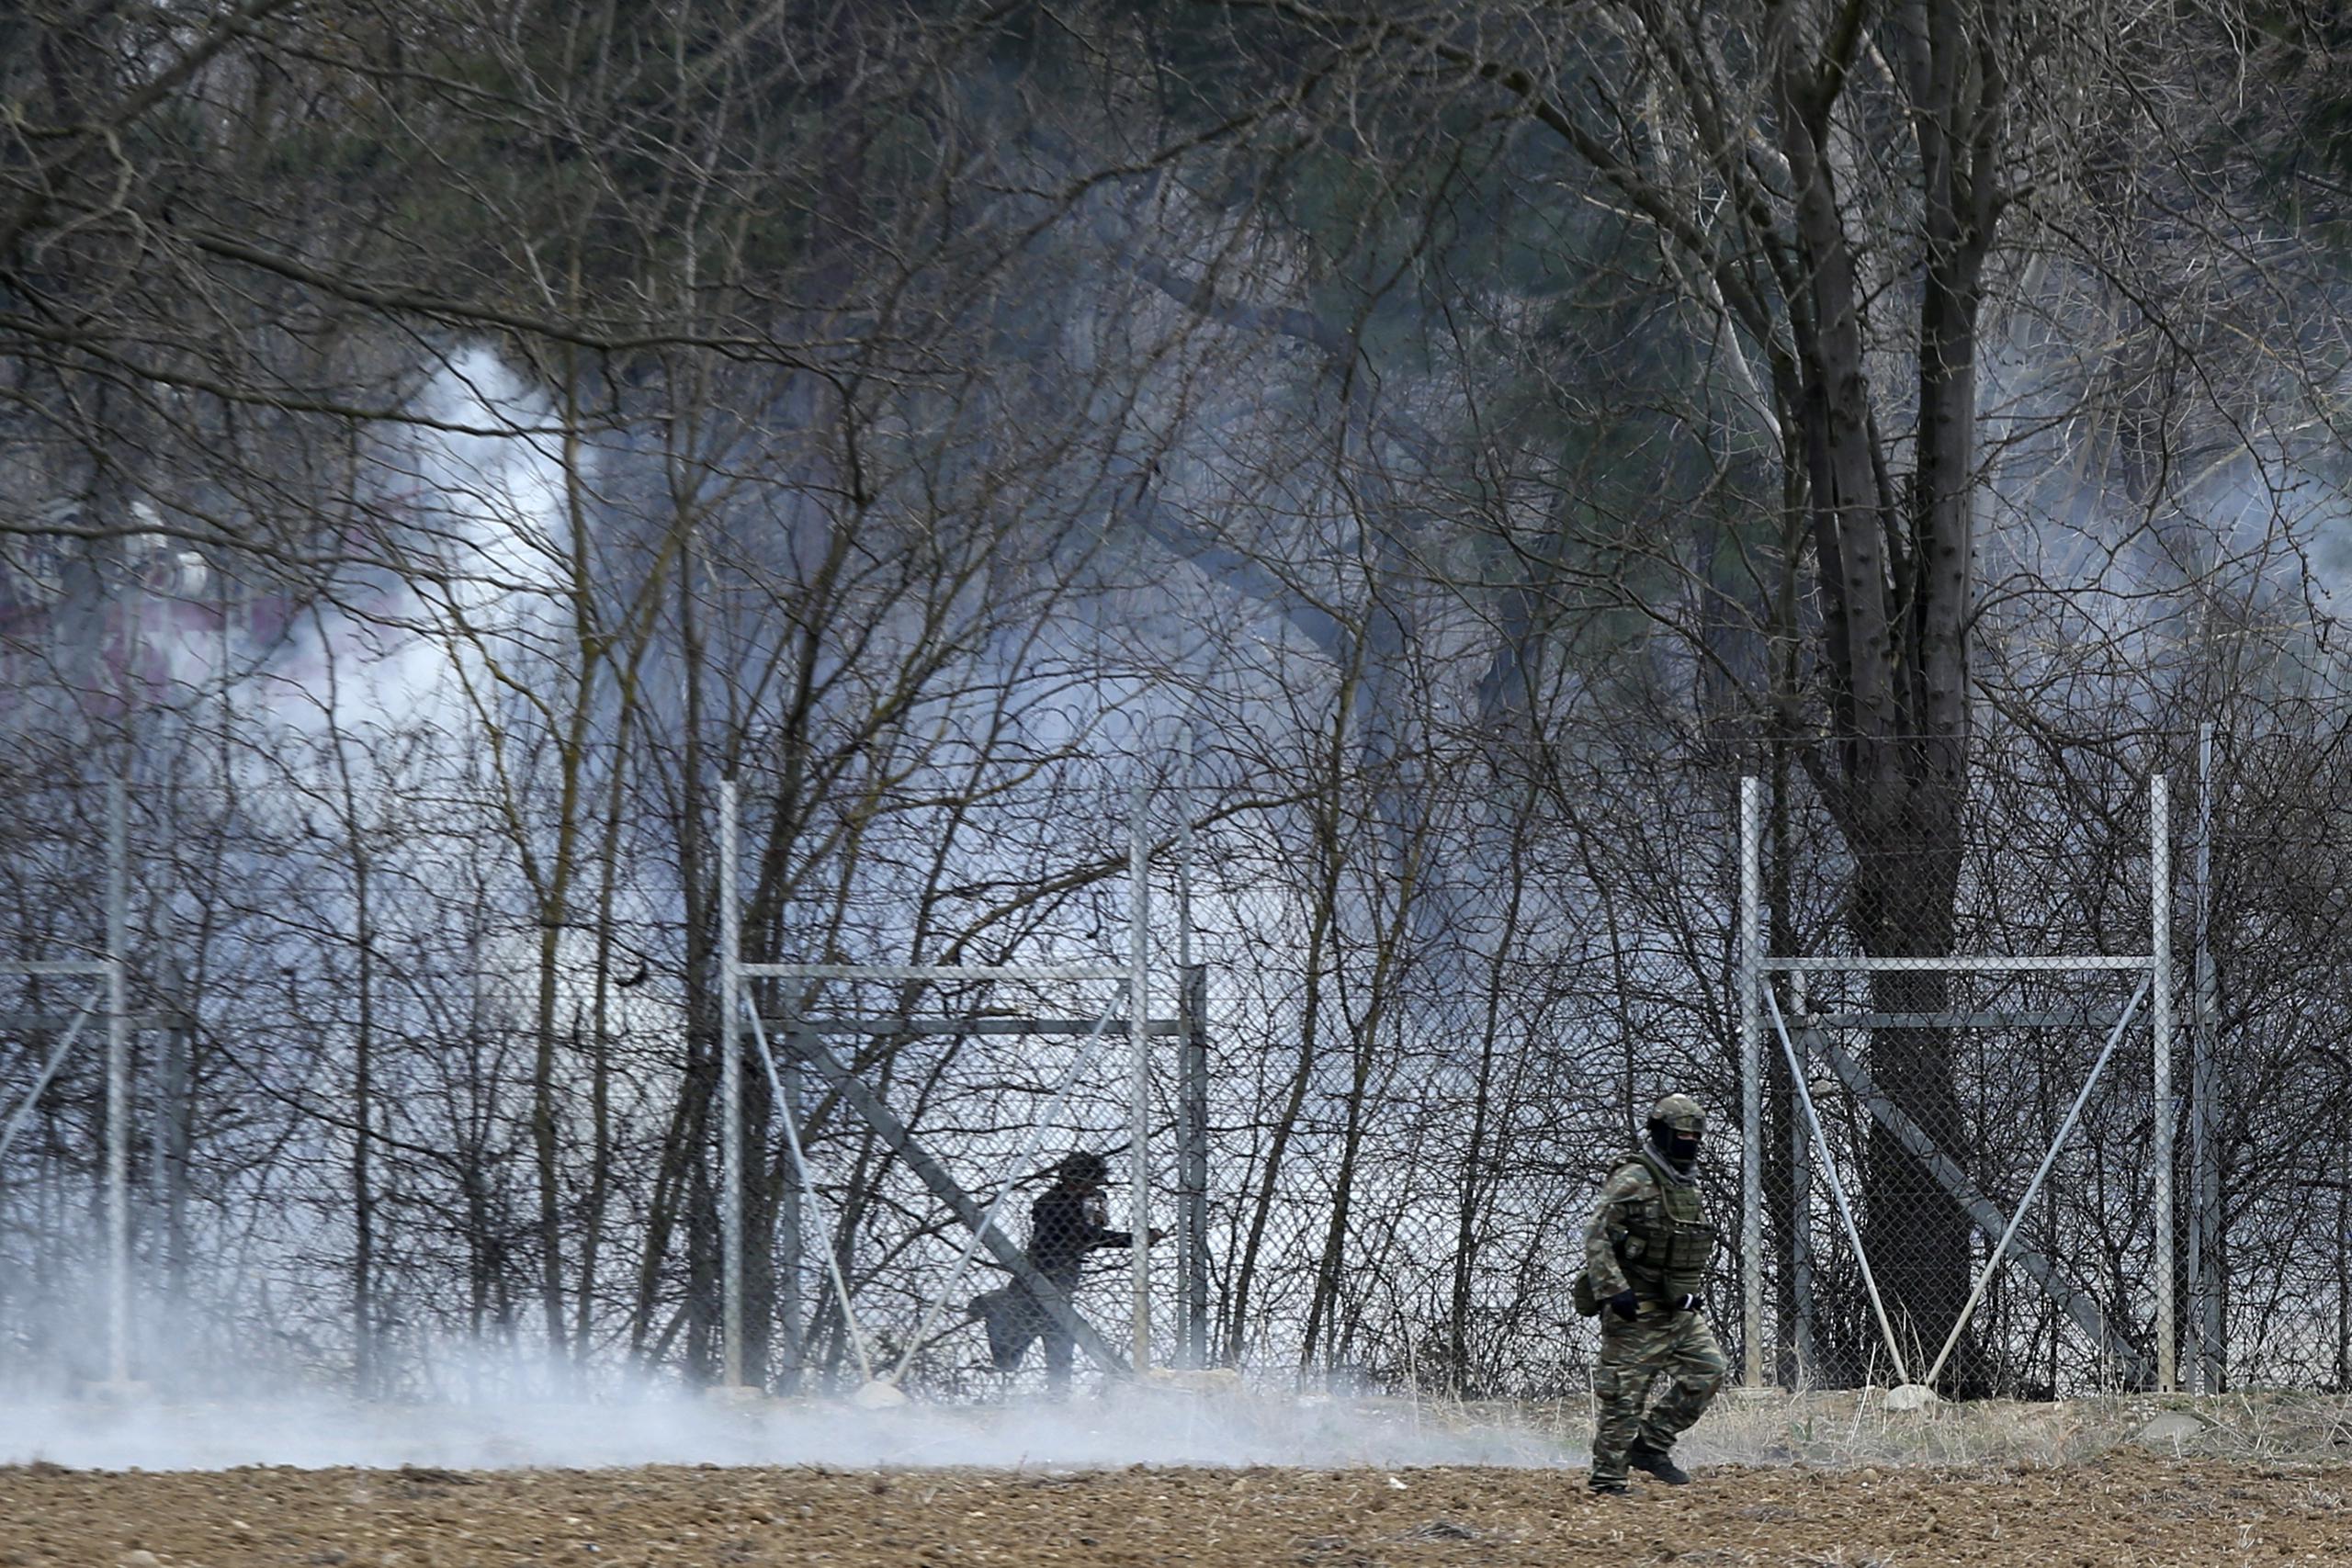 A Greek army officer patrols as a migrant is seen at the Turkish side at the Greek-Turkish border in Kastanies on Wednesday, March 4, 2020. Facing a potential wave of nearly a million people fleeing fighting in northern Syria, Turkey has thrown open its borders with Greece to thousands of refugees and other migrants trying to enter Europe, and has threatened to send "millions" more. (AP Photo/Giannis Papanikos)